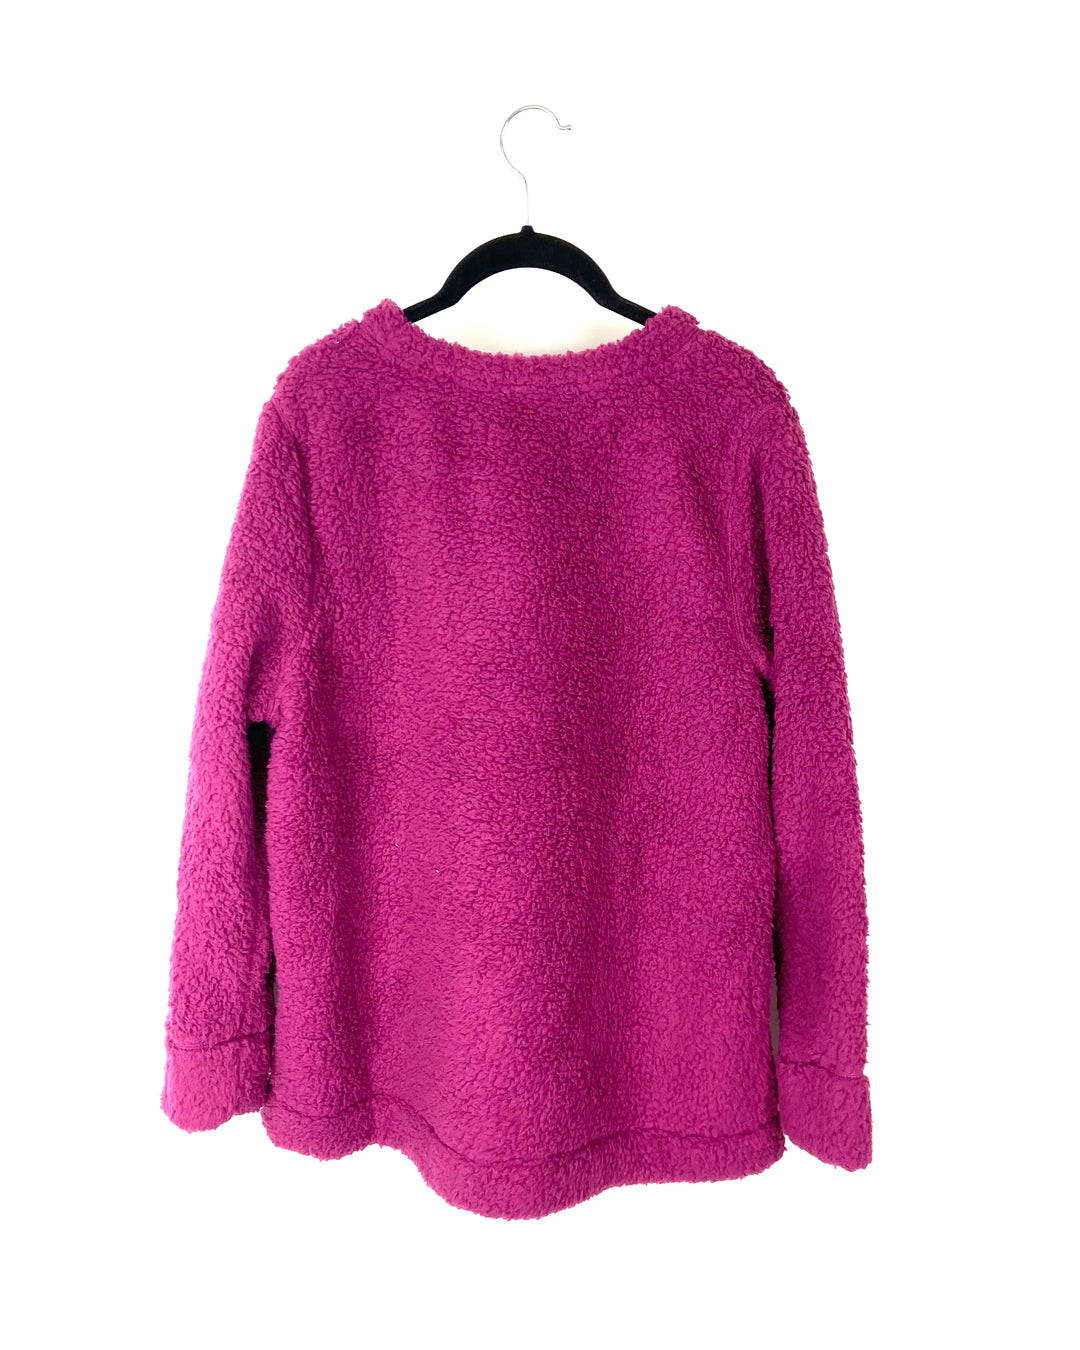 Sherpa Top- Small